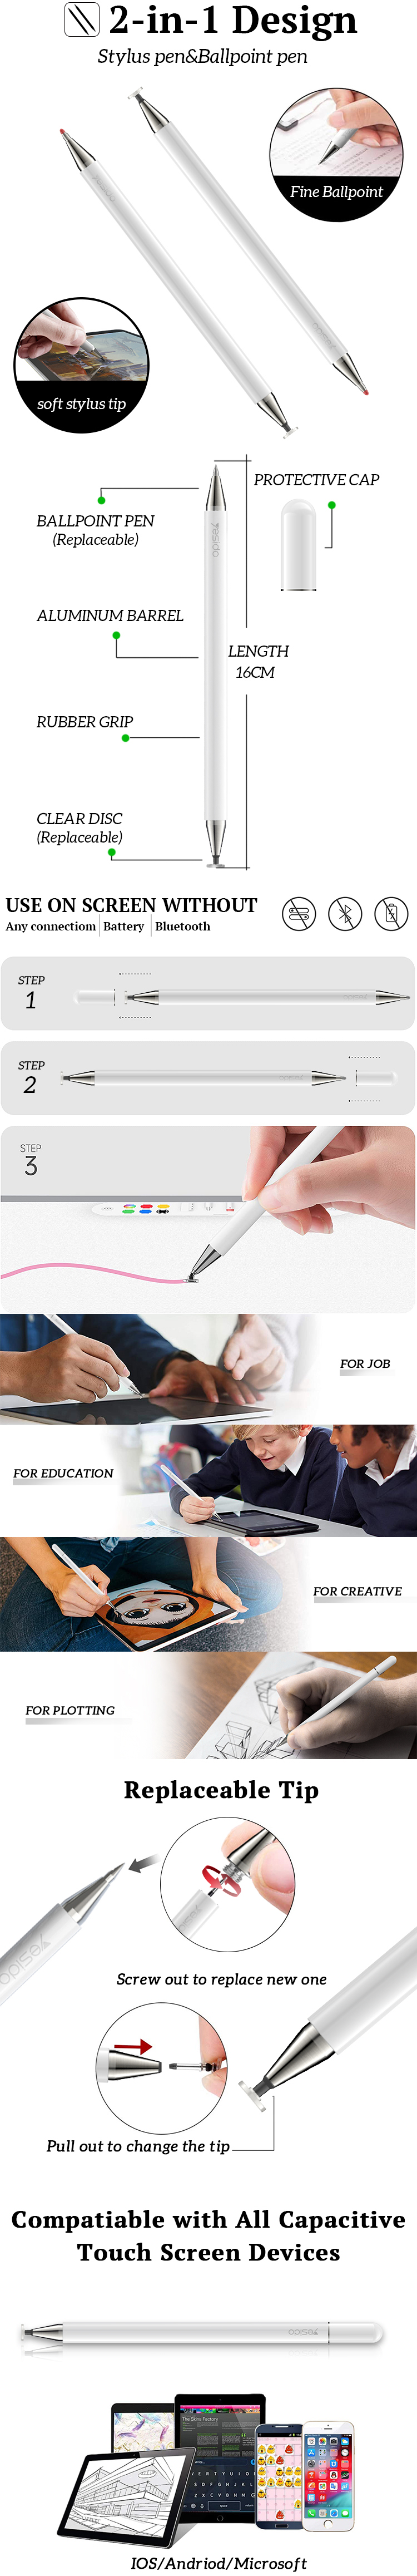 Yesido-ST04-Universal-2-In-1-Stylus-Pen-High-Sensitive-Passive-Capacitive-Pen-Touch-Screen-Stylus-Dr-1893932-1